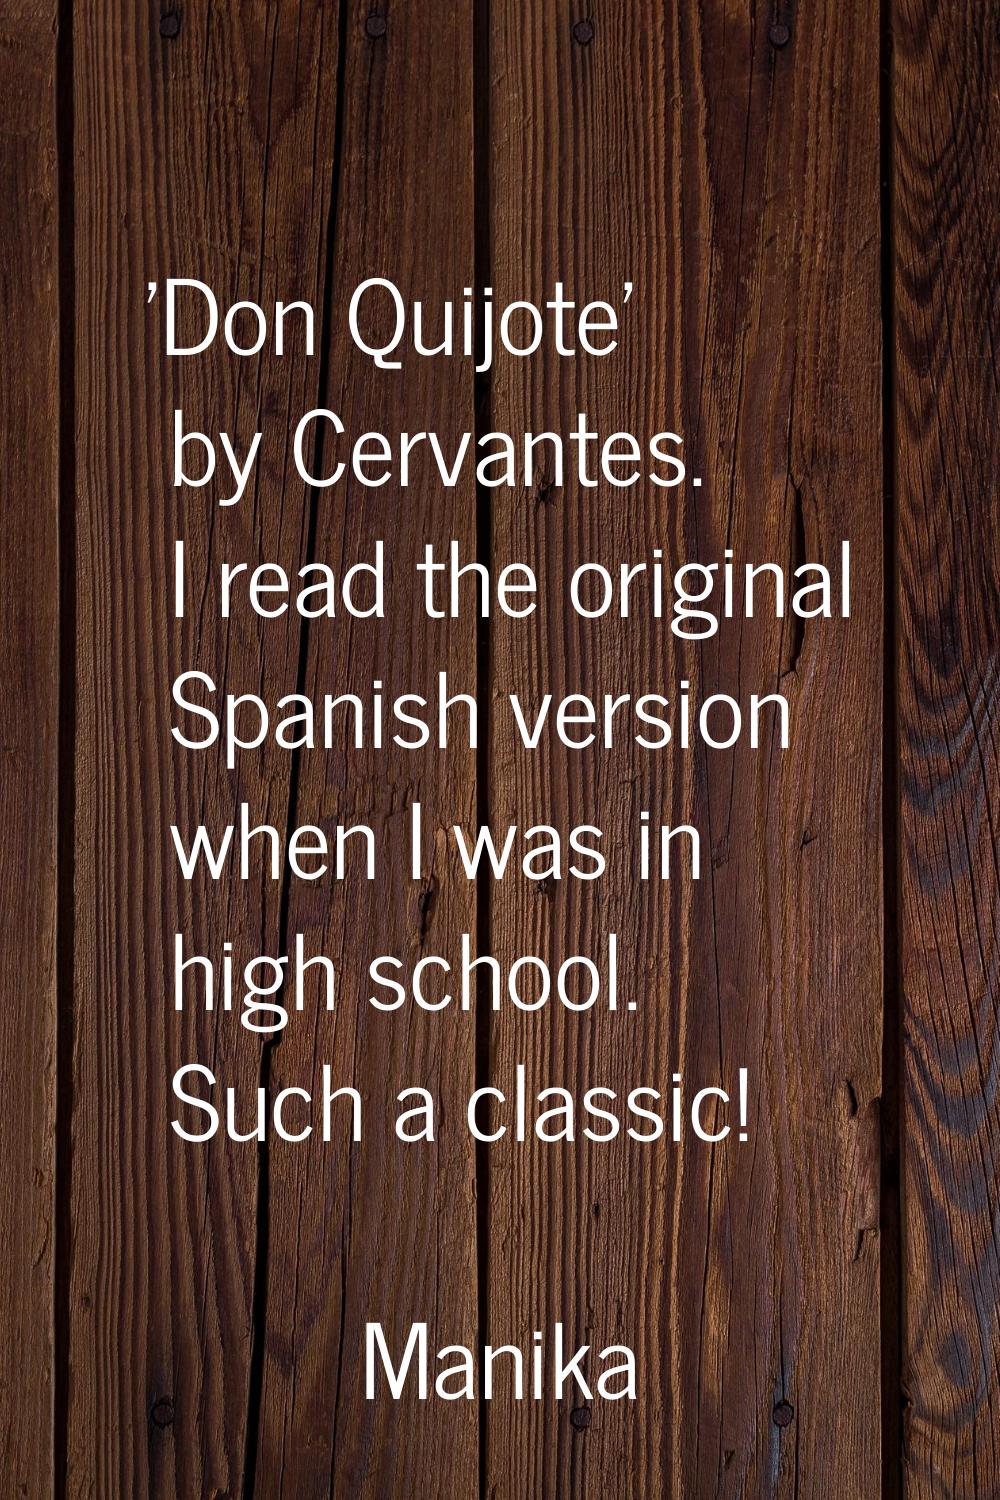 'Don Quijote' by Cervantes. I read the original Spanish version when I was in high school. Such a c